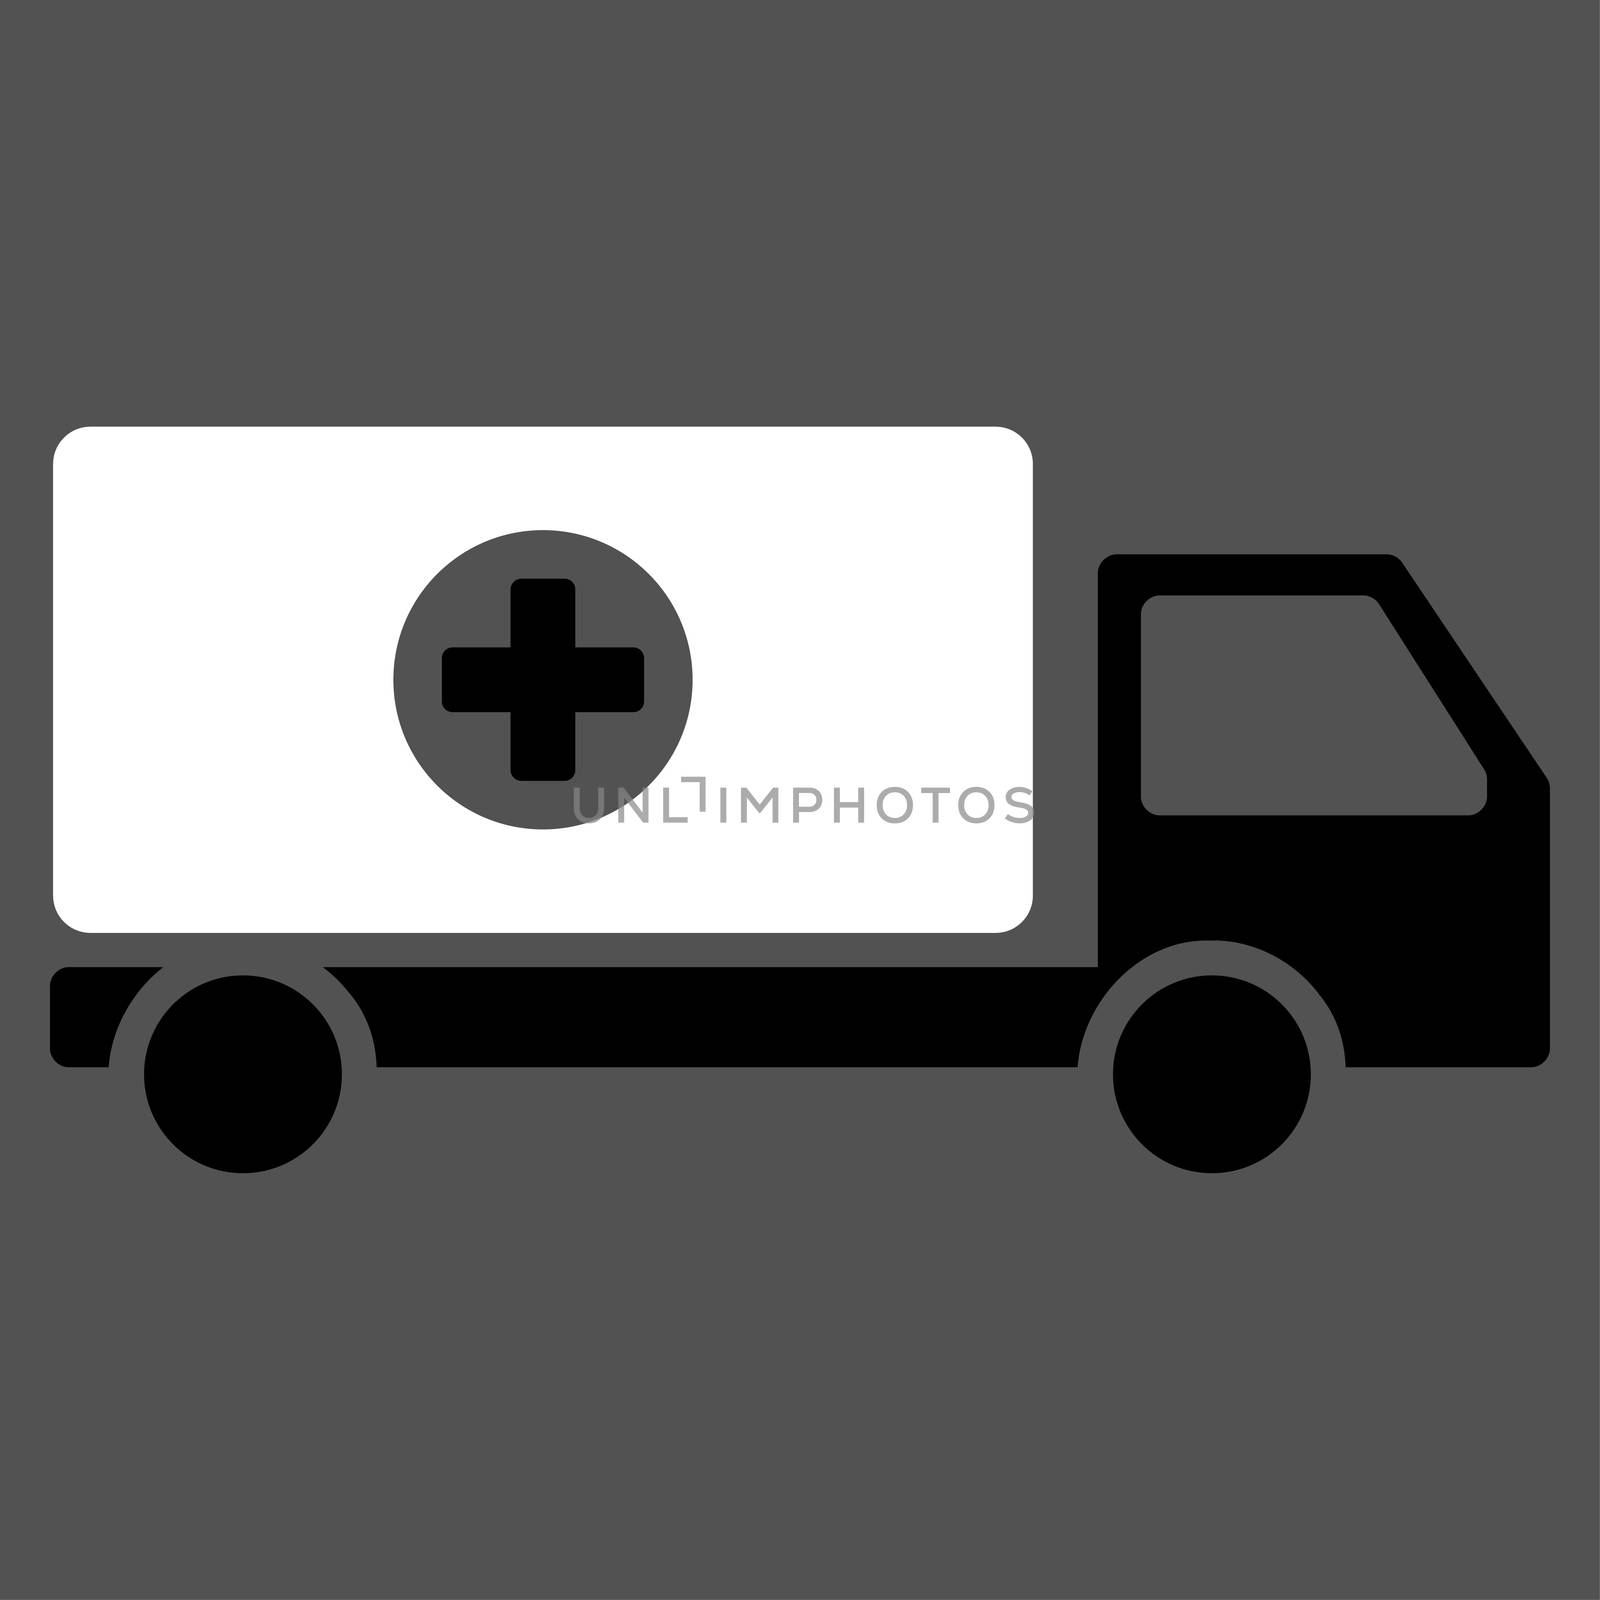 Drugs Shipment raster icon. Style is bicolor flat symbol, black and white colors, rounded angles, gray background.